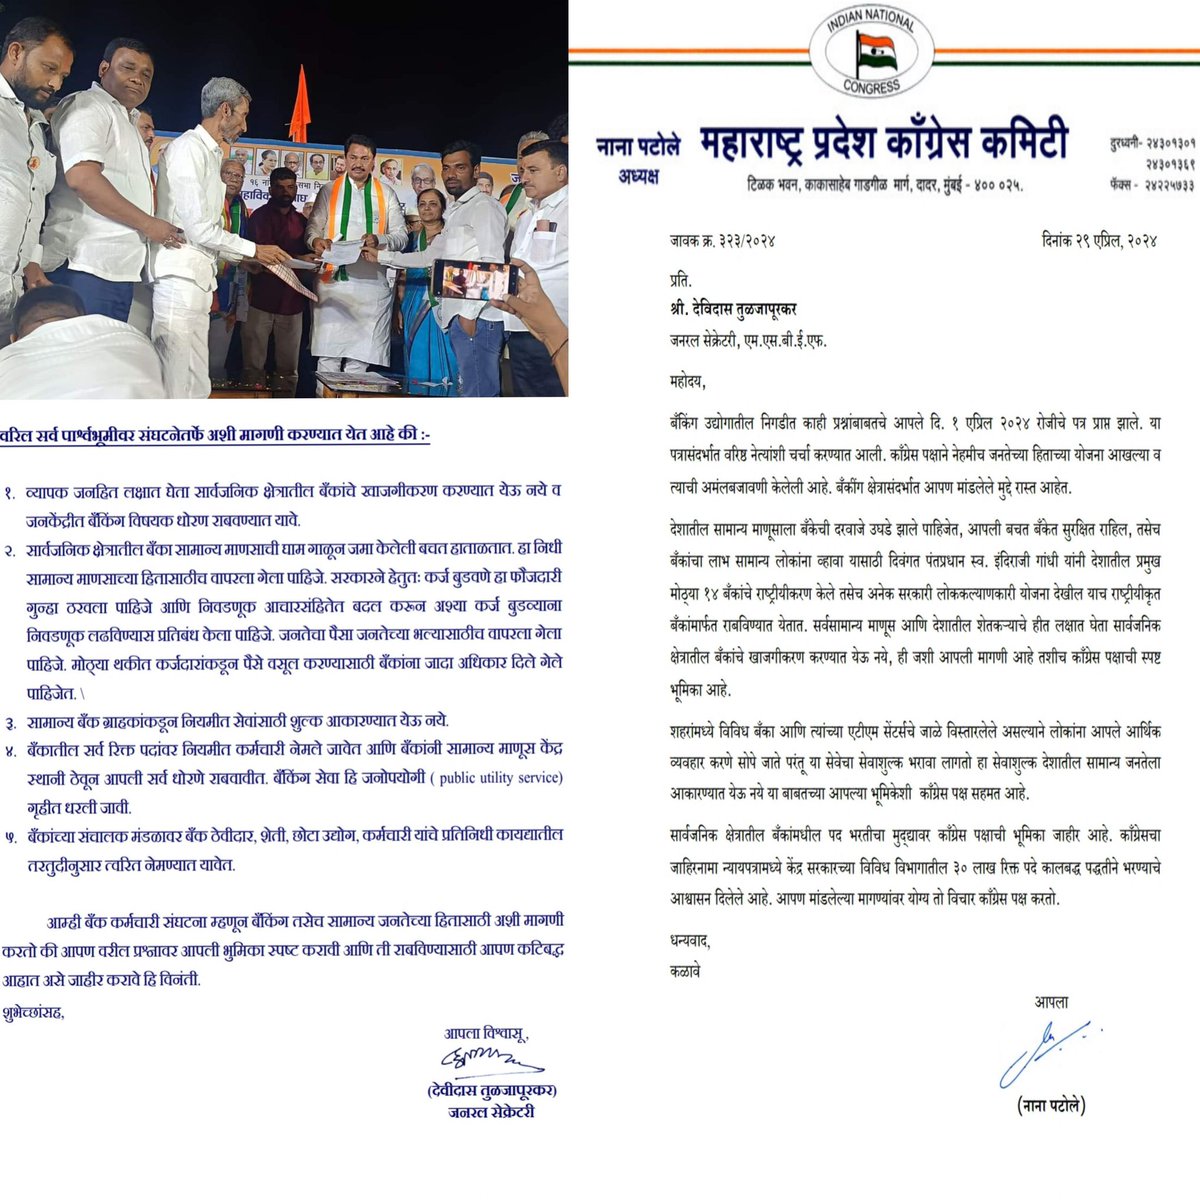 As part of our campaign, on behalf of MSBEF, Com. Uttam Holikar has briefed our stand and submitted our appeal letter to Mr. Nana Patole, State President, All India Congress Committee at election campaign rally at Nanded. #AIBEA #MSBEF @ChVenkatachalam @DTuljapurkar